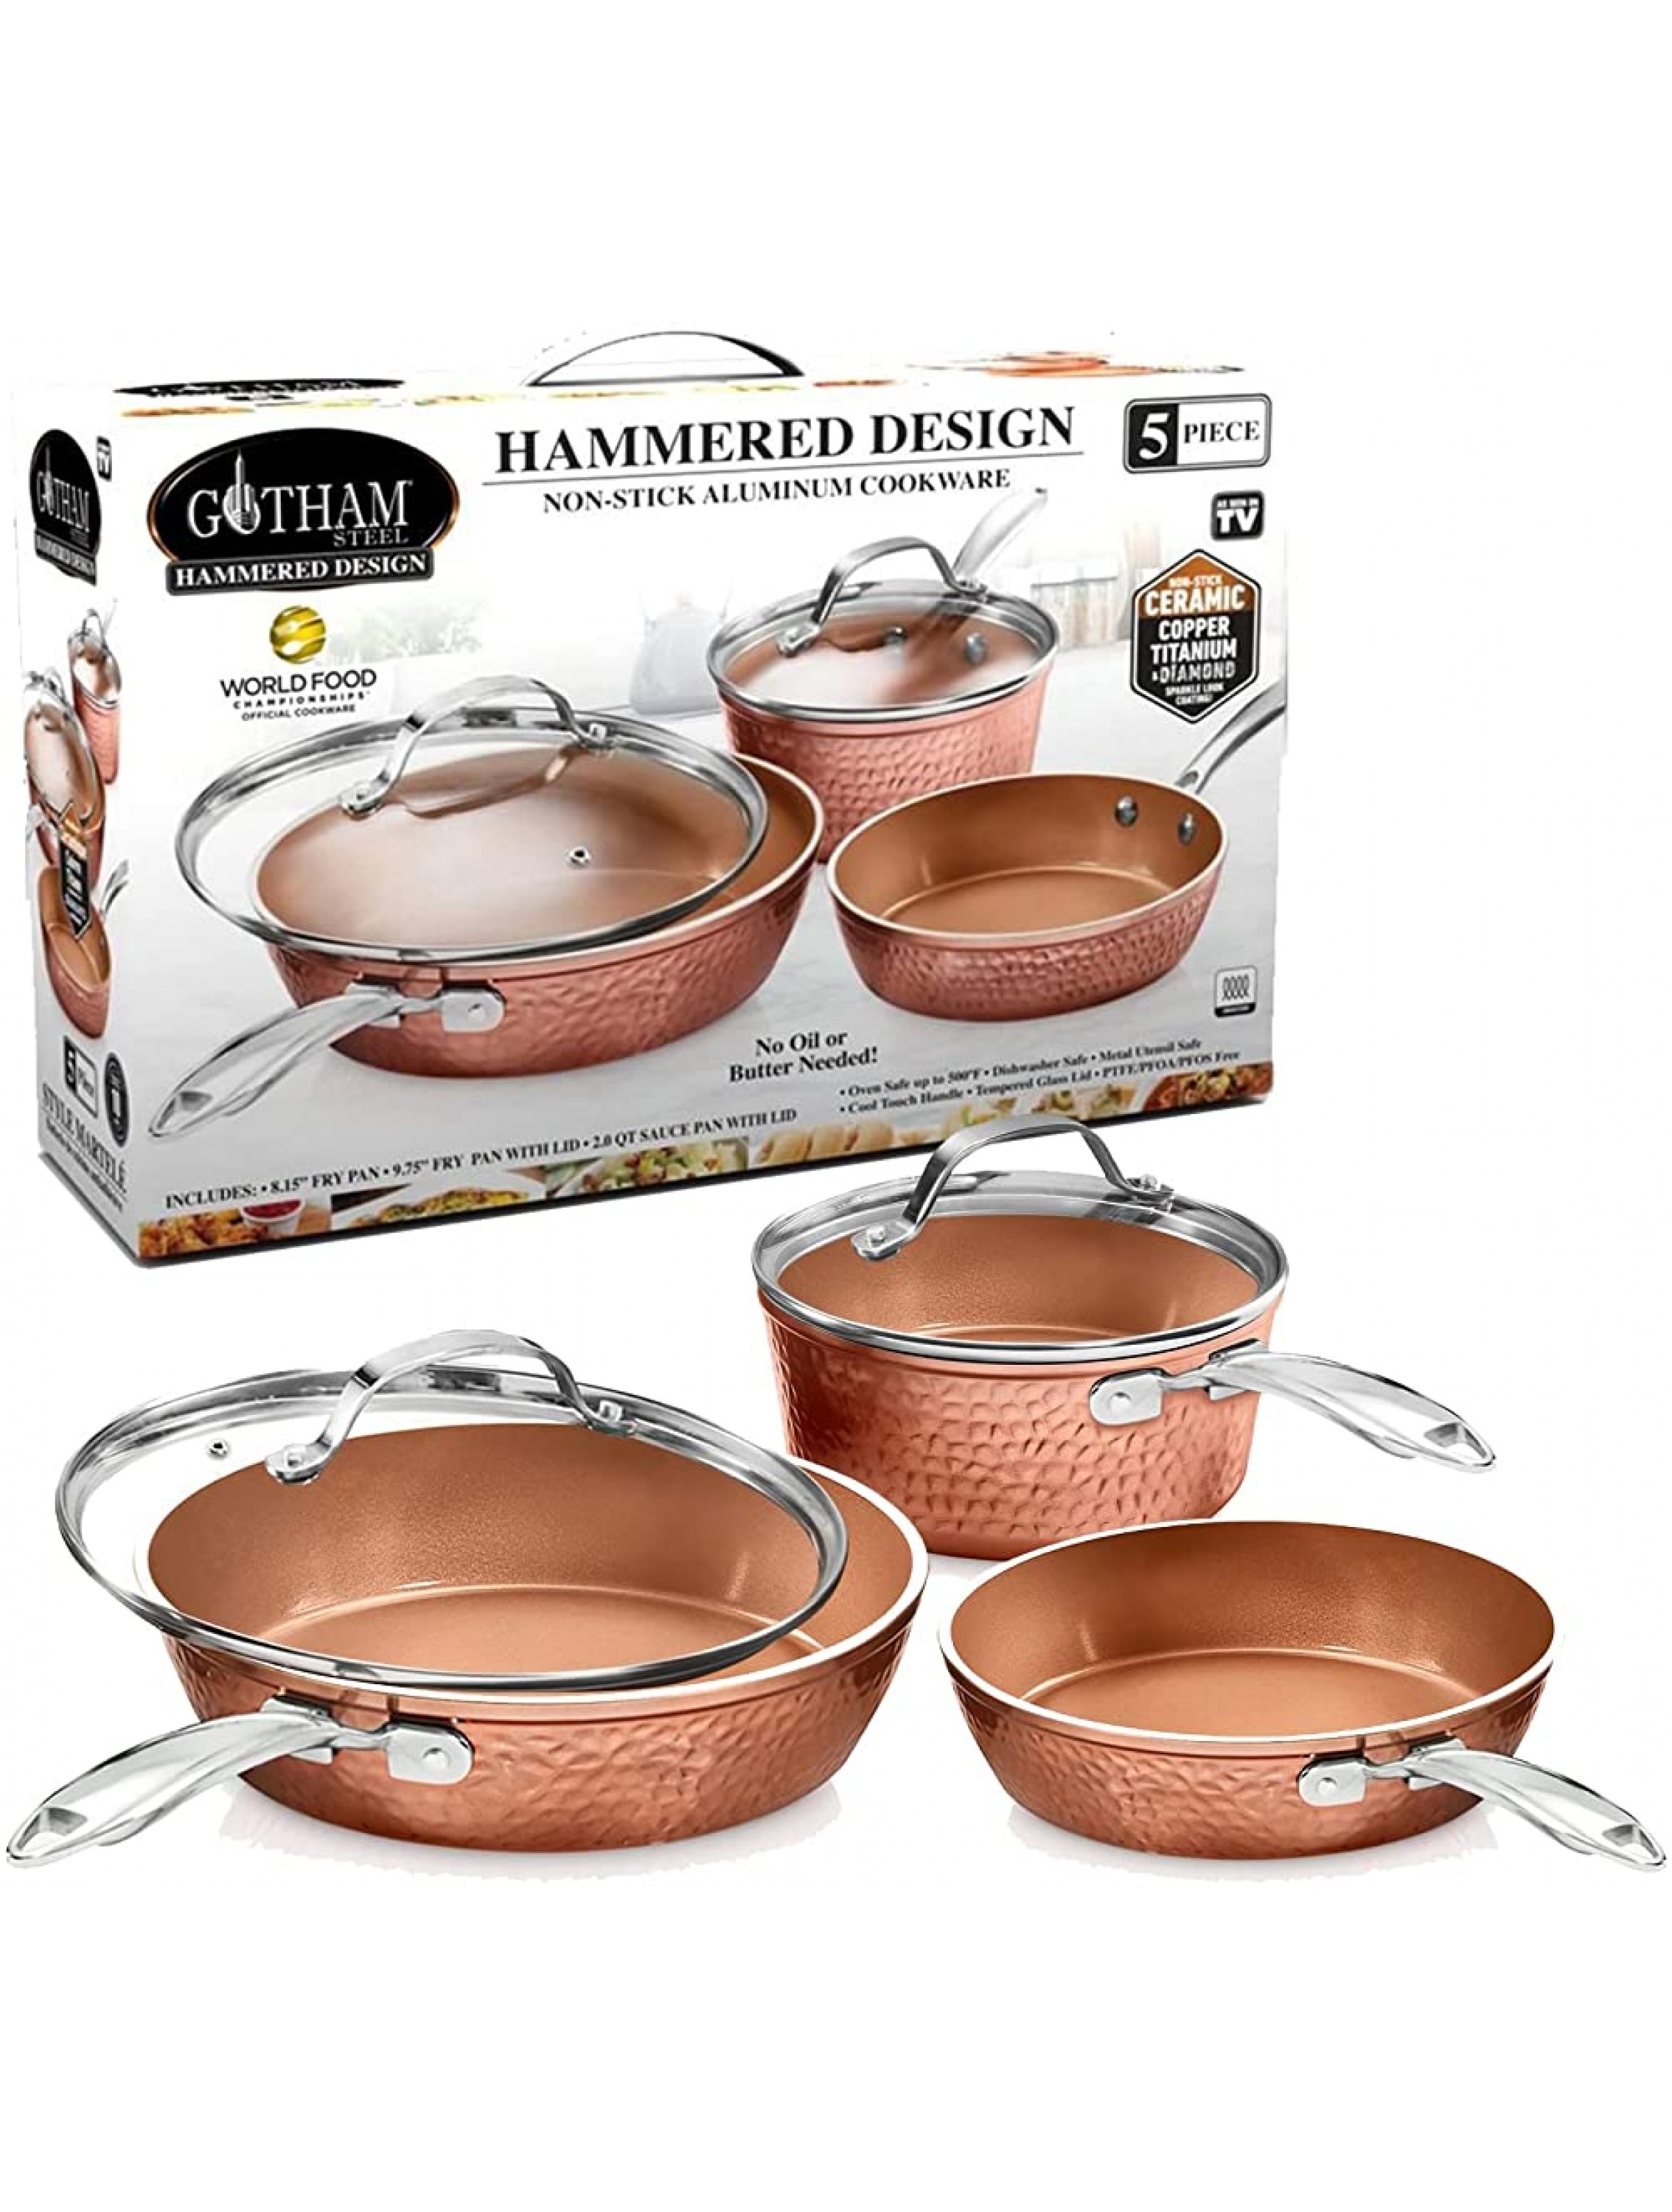 Gotham Steel Premium Hammered Cookware – 5 Piece Ceramic Cookware Pots and Pan Set with Triple Coated Nonstick Copper Surface & Aluminum Composition for Even Heating Oven Stovetop & Dishwasher Safe - BX492MGZ5